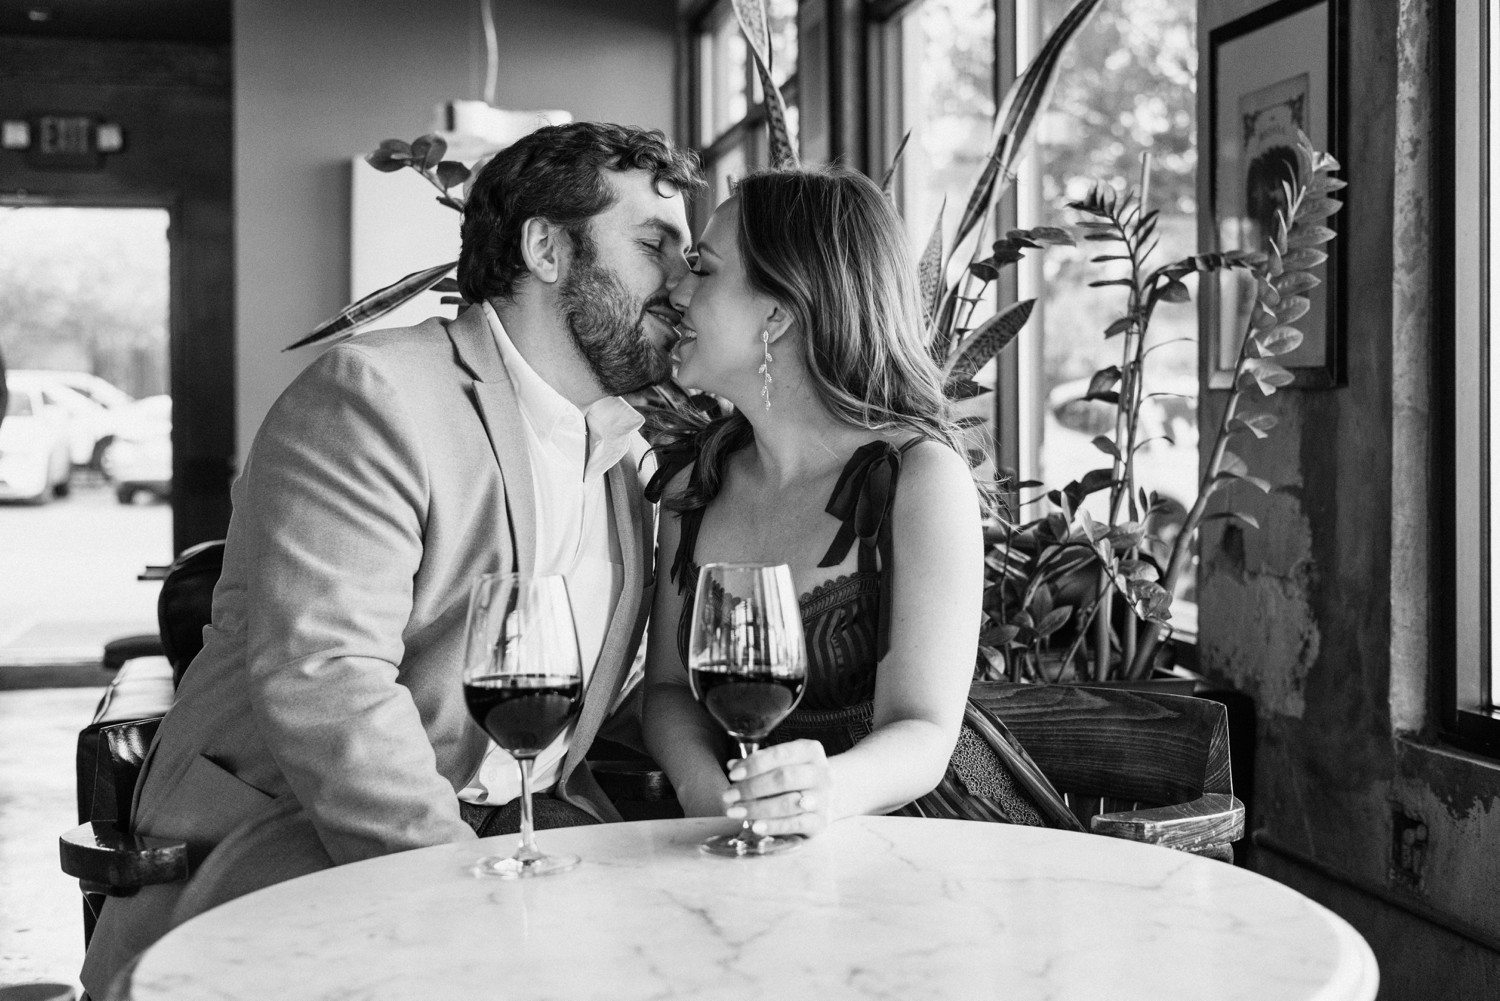 Engagement Photos in Houston Heights with wine glasses